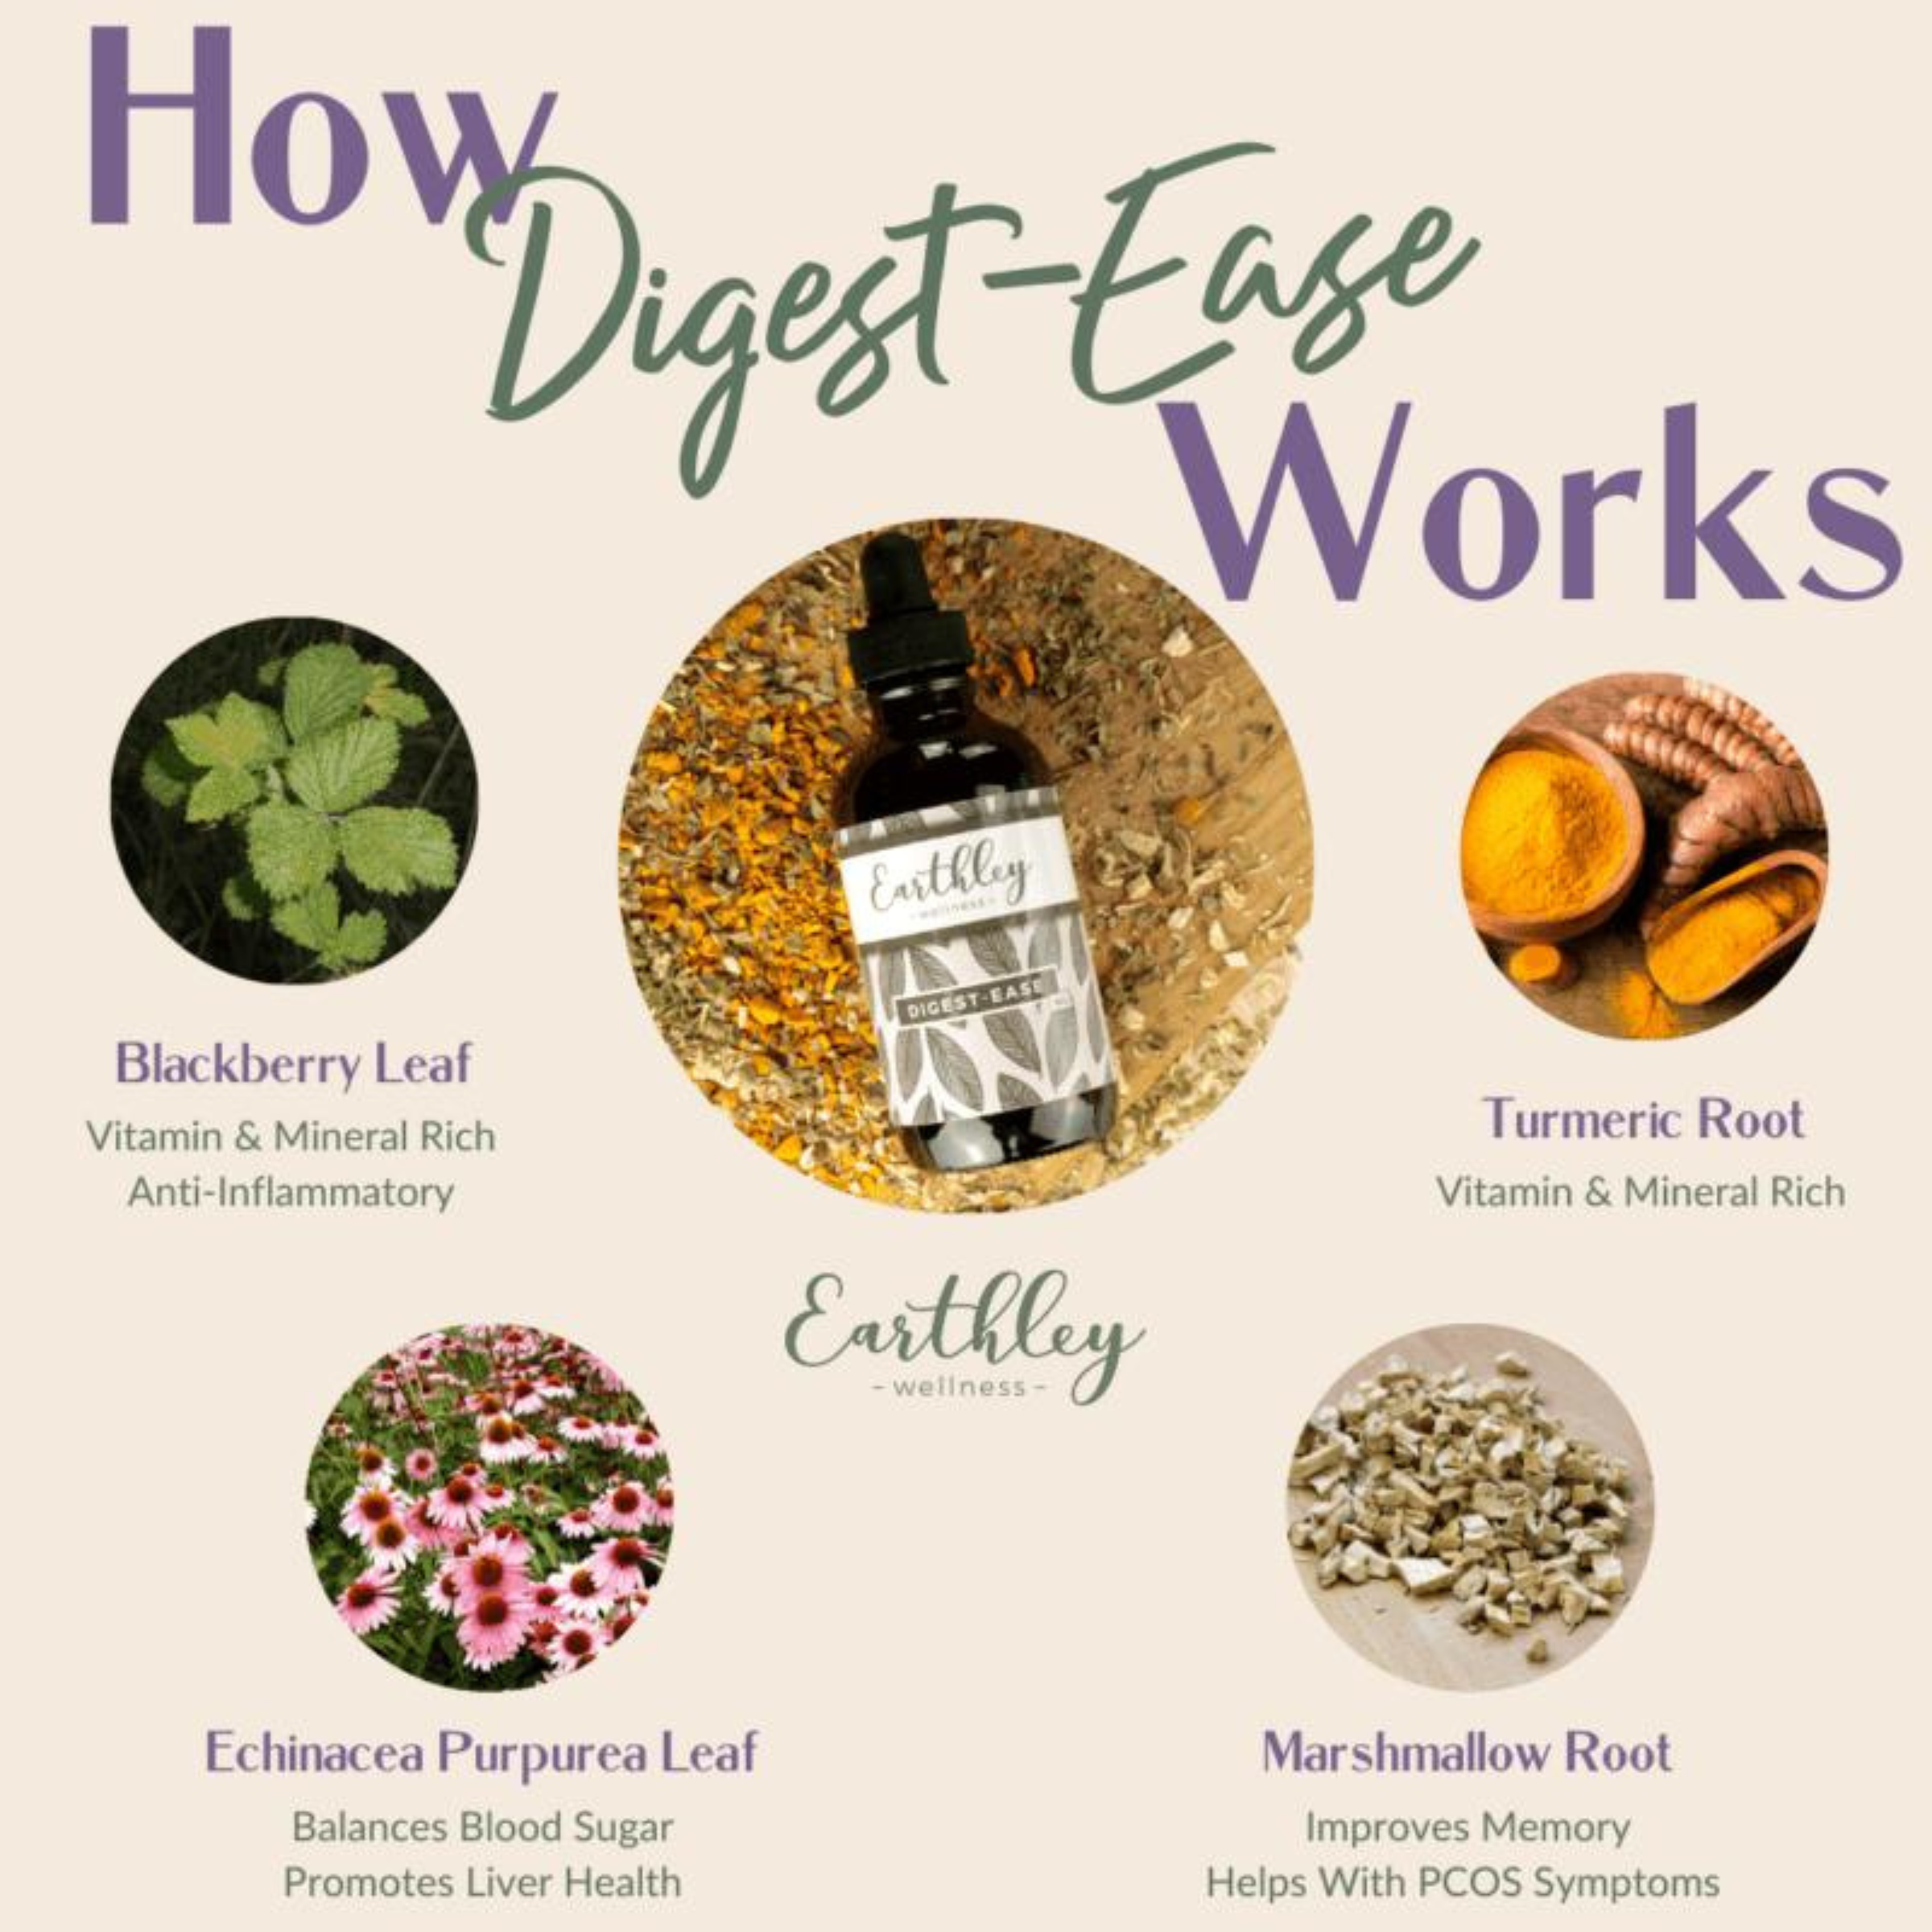 Digest Ease Herbal Extract